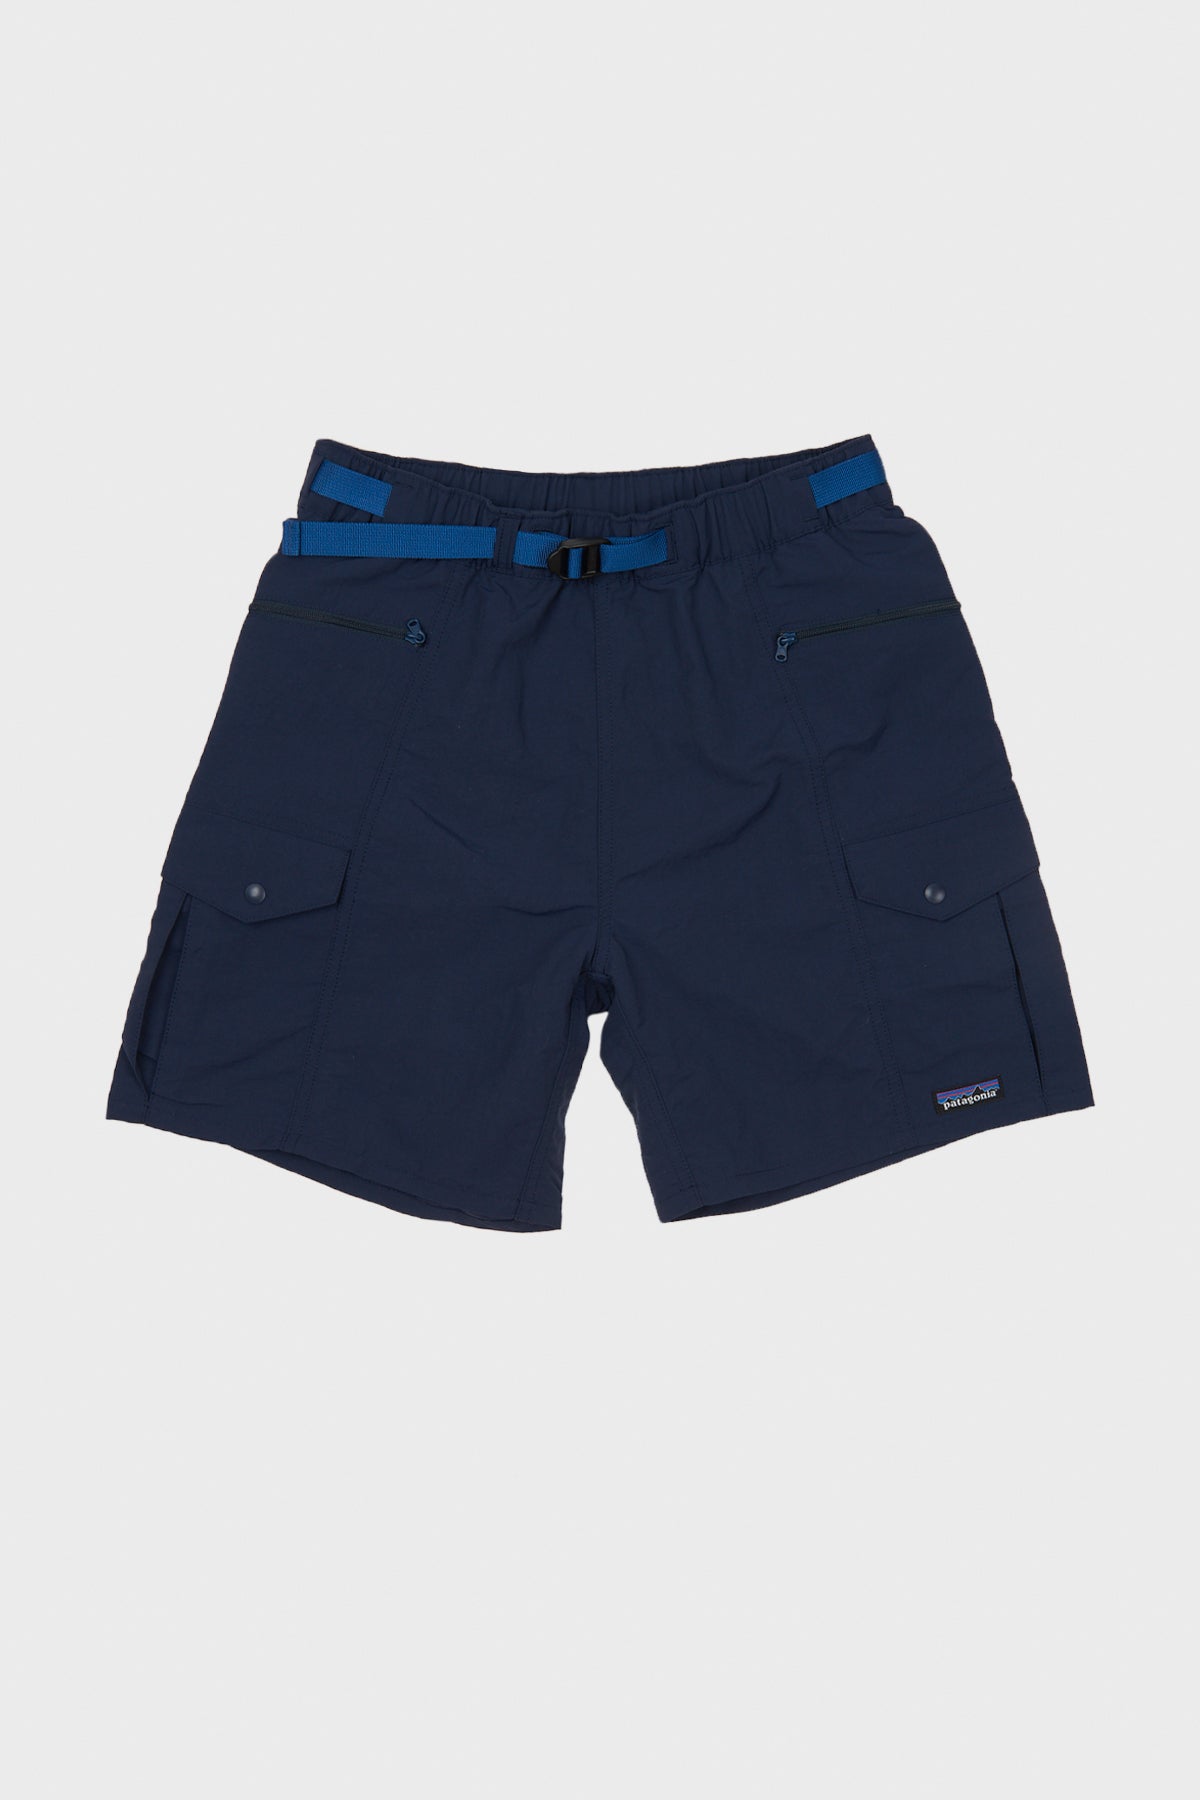 Patagonia - Outdoor Everyday 7" Shorts